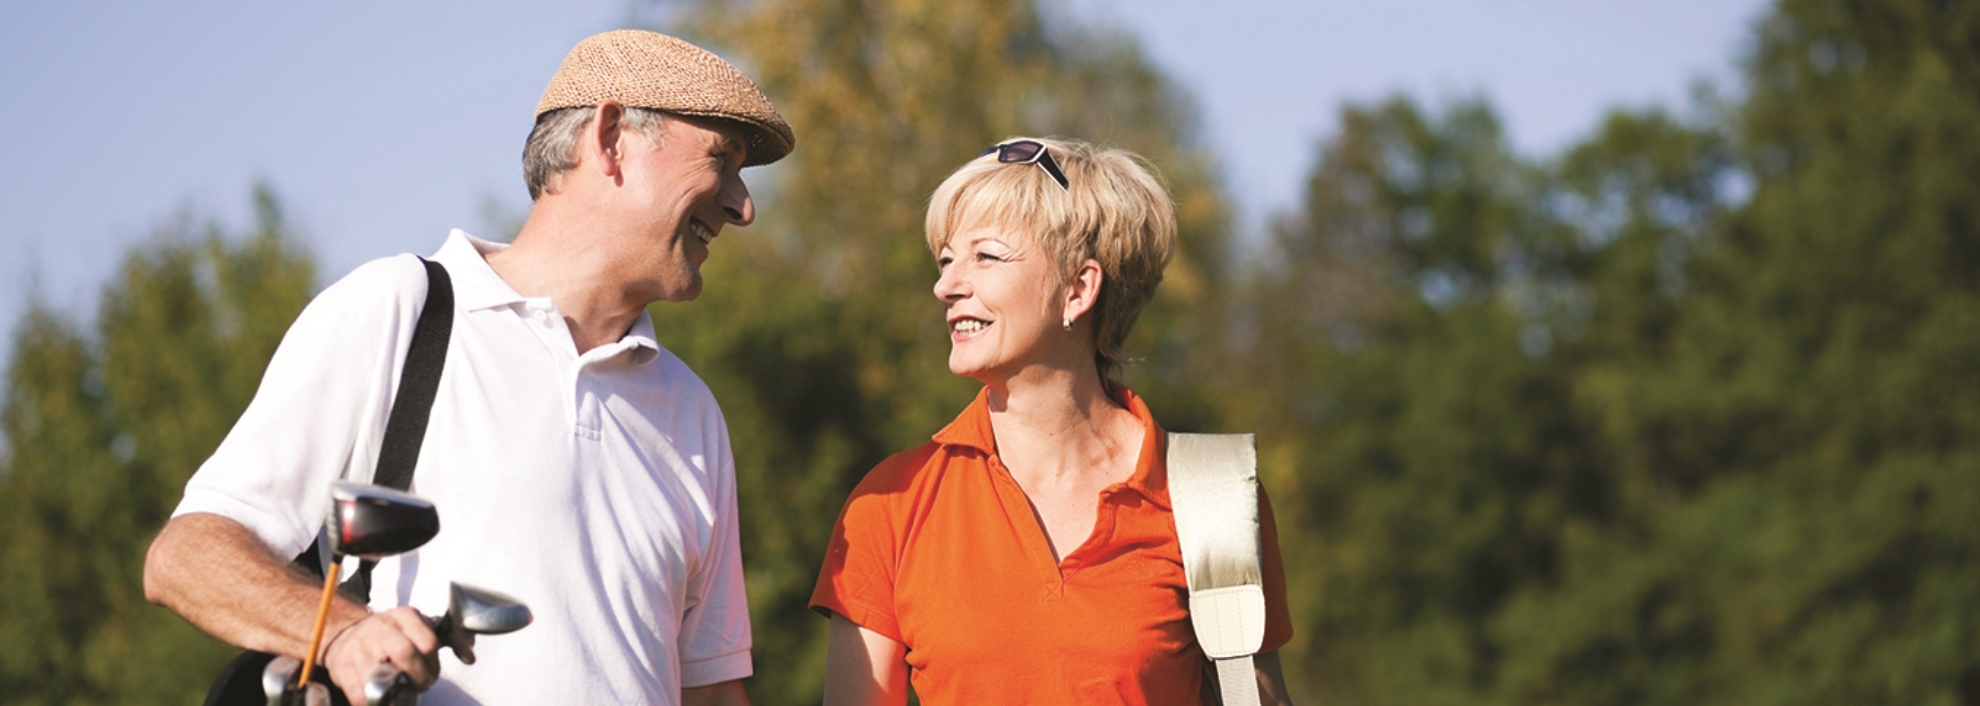 Couple smiling at each other carrying golf clubs